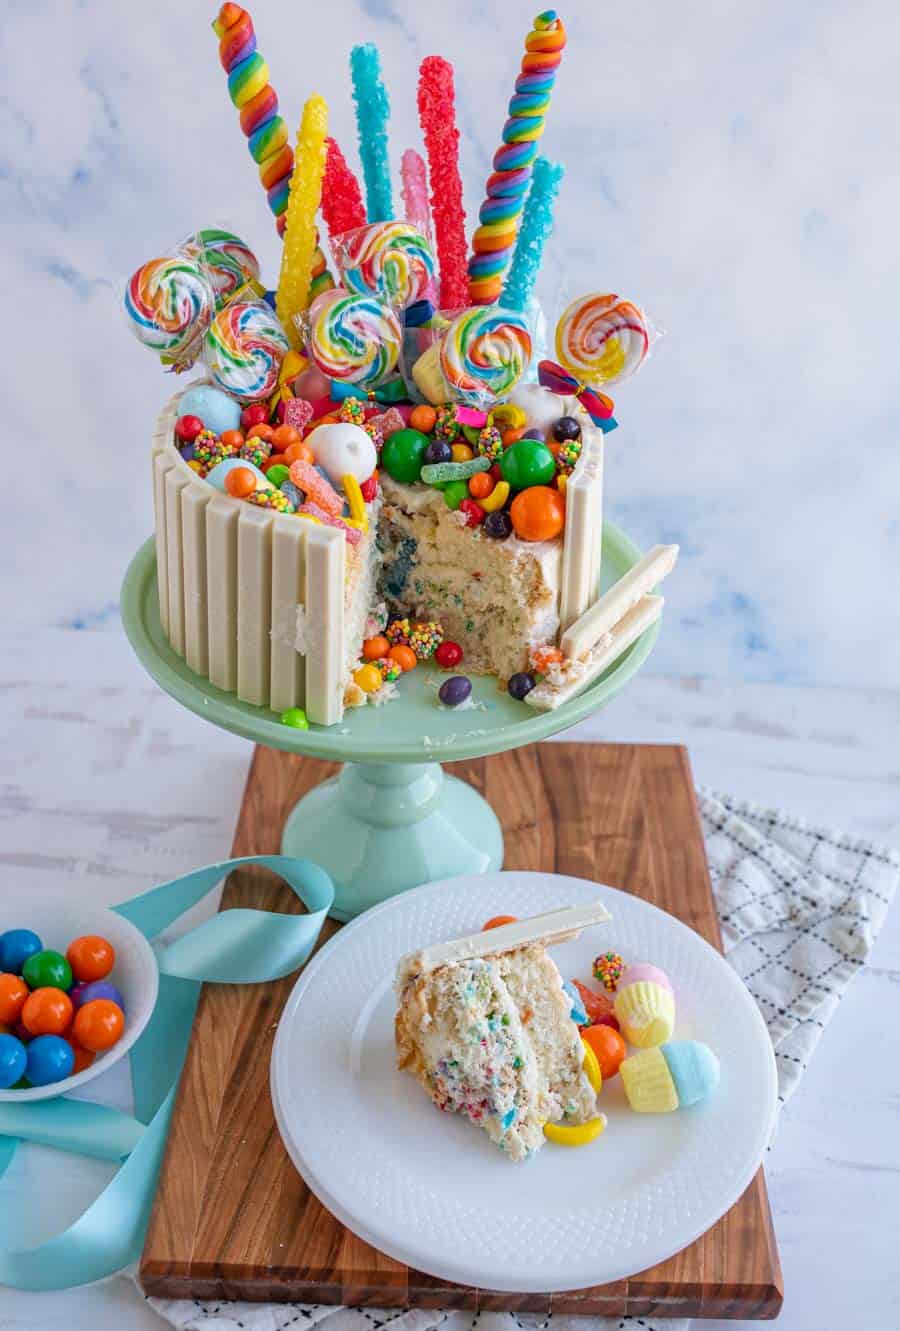 picture of a slice of candy cake on a plate with the cake on a cake stand in the background